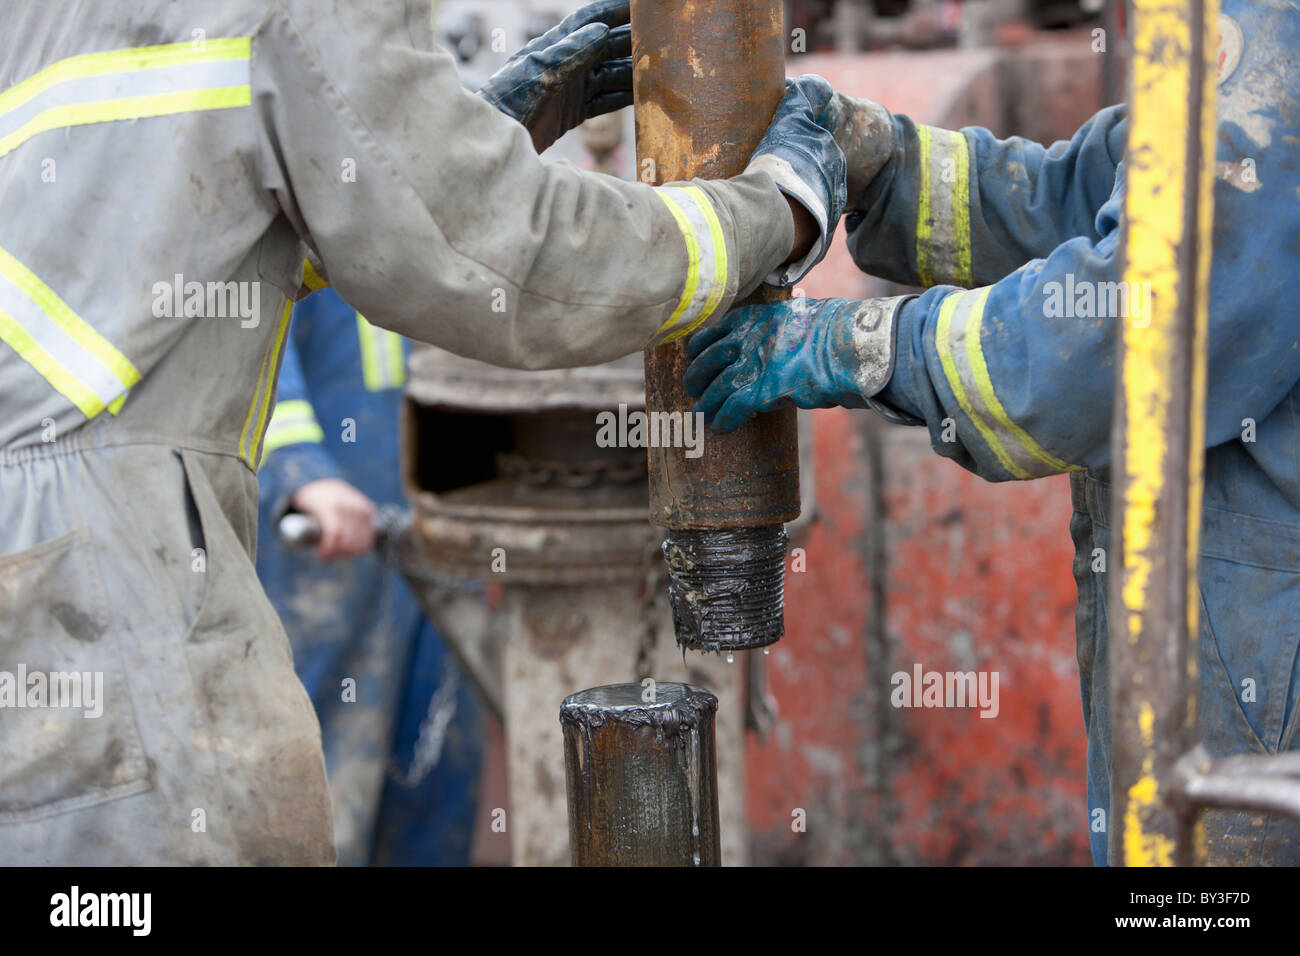 Oil workers drilling for oil on rig Stock Photo